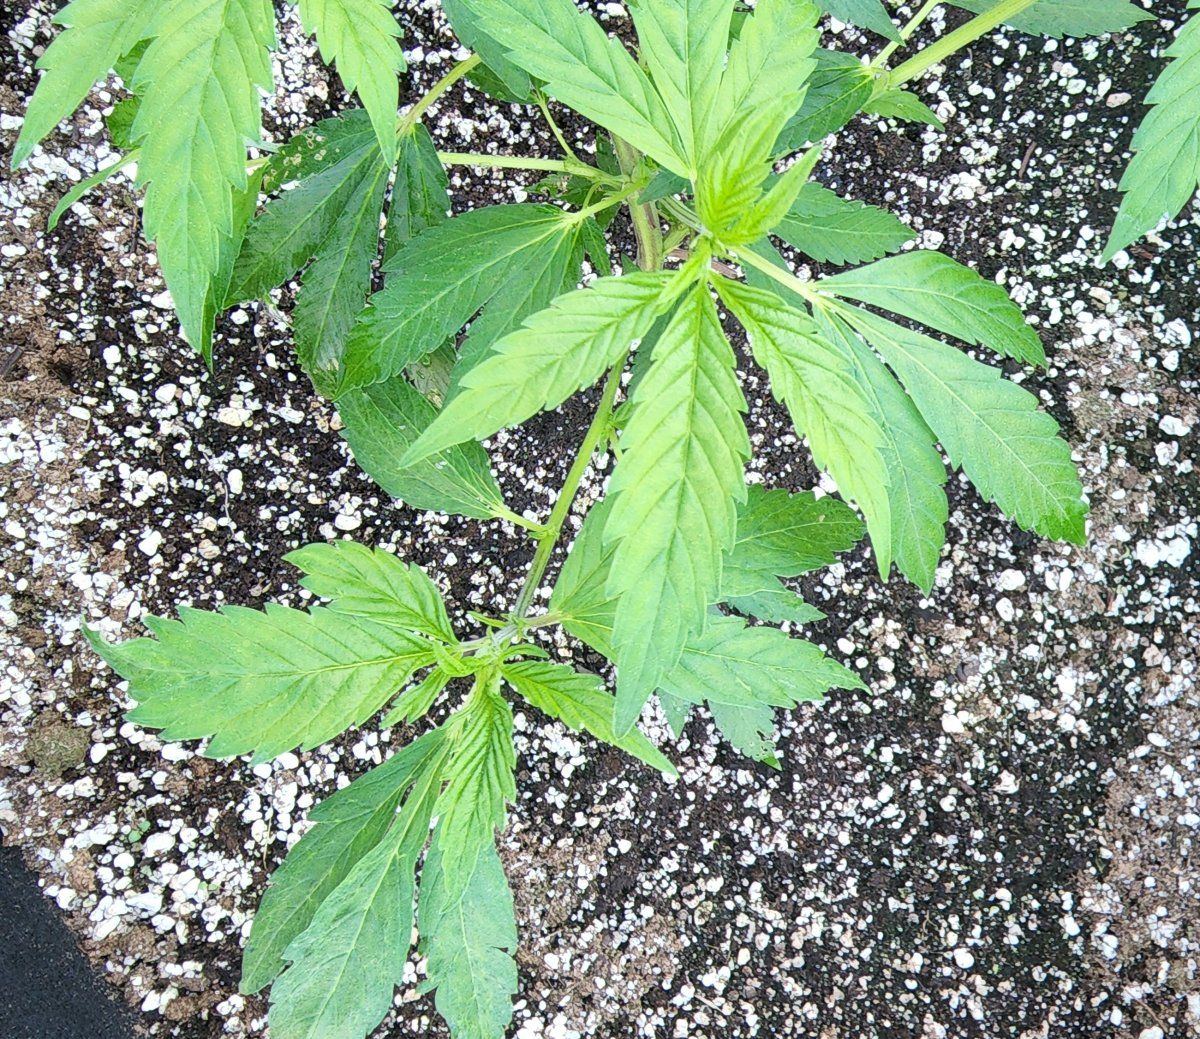 Deficiency open to any suggestions